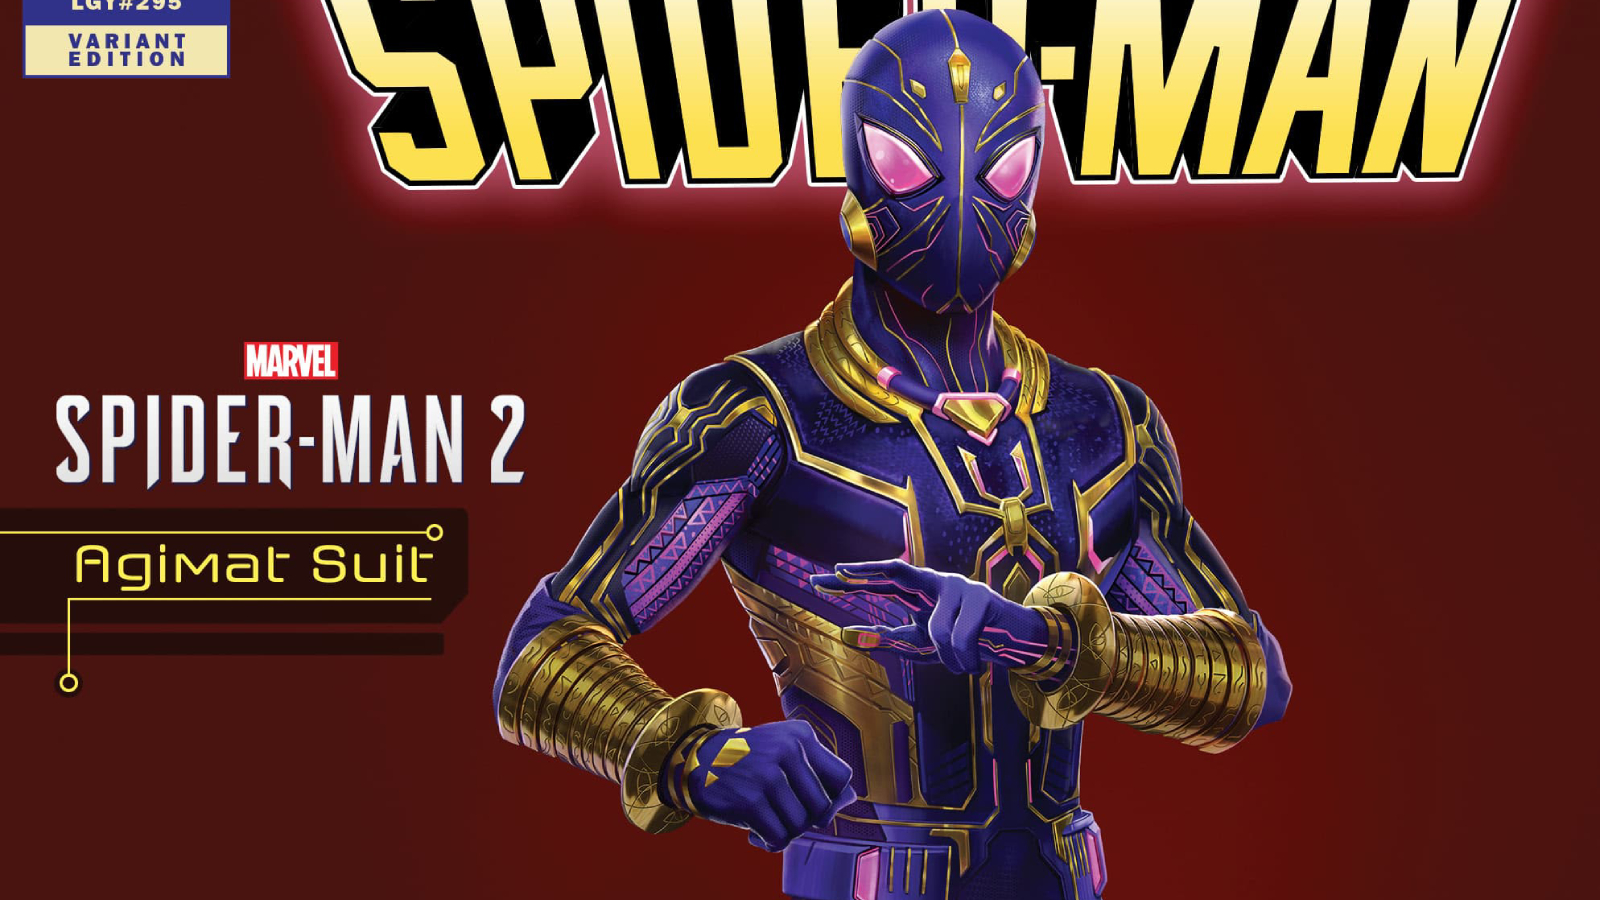 Marvel's Spider-Man 2 Costumes Showcased on Comic Covers